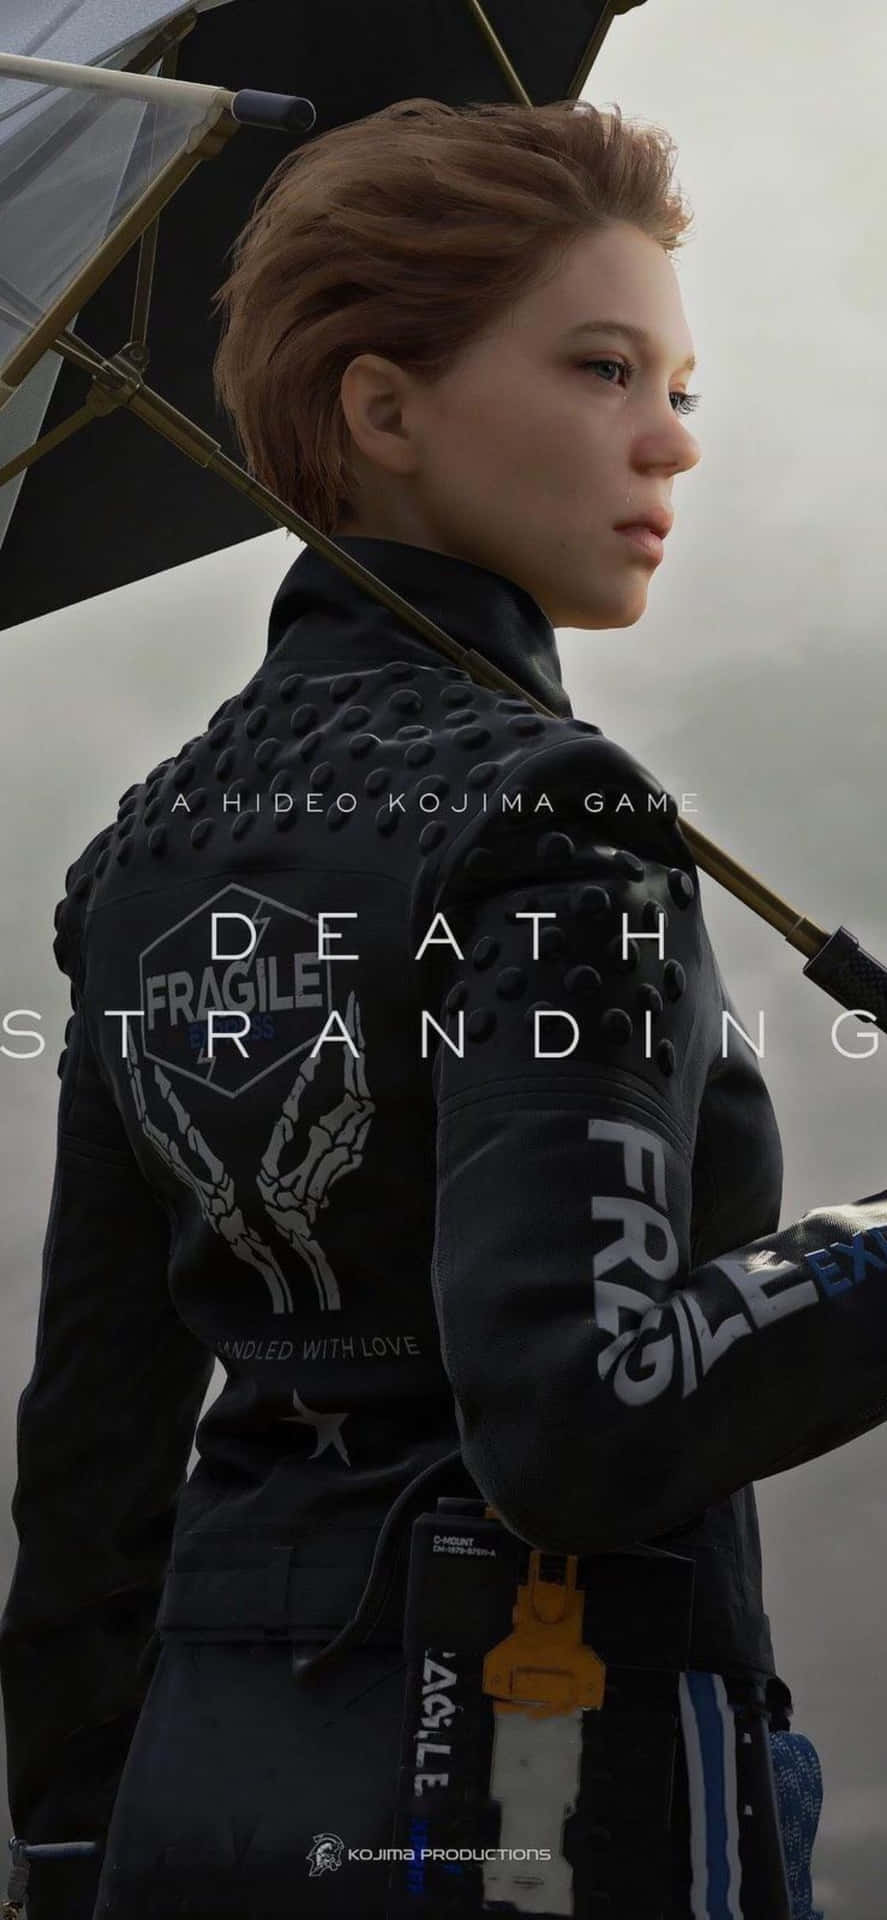 Get lost in a post-apocalyptic world with the captivating game, Death Stranding, on your iPhone X